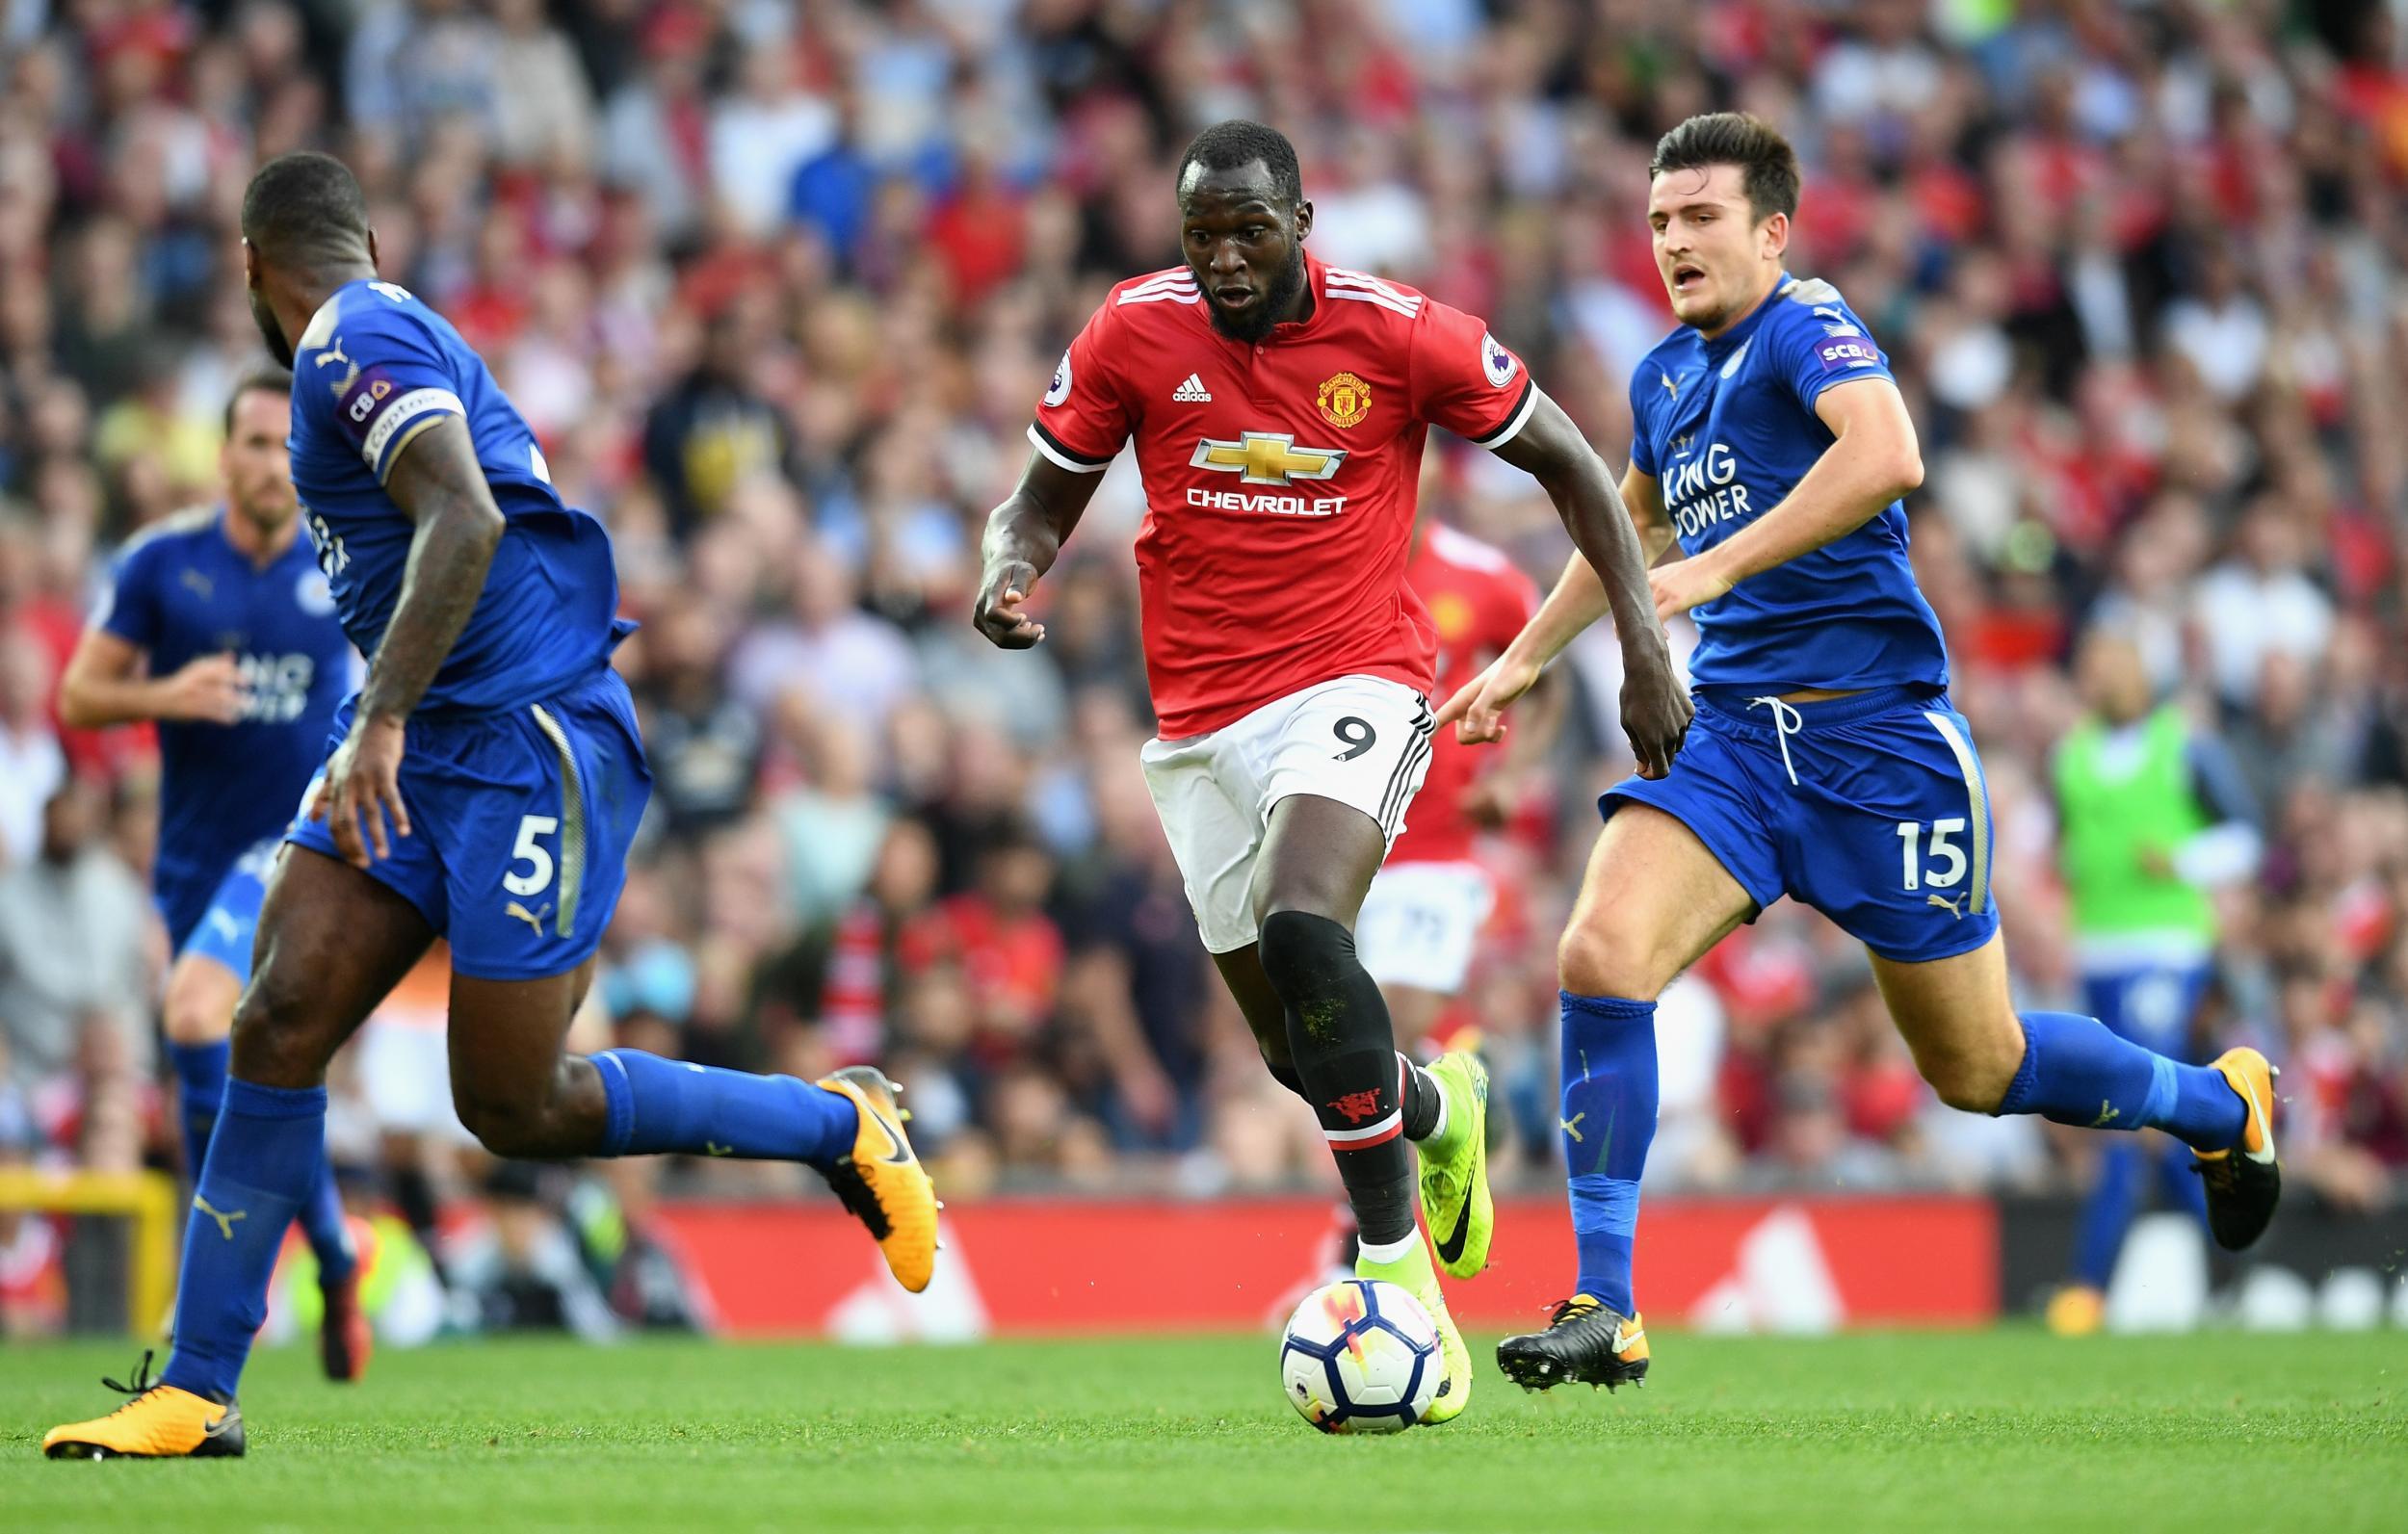 Manchester United won 2-0 in their last meeting with Leicester